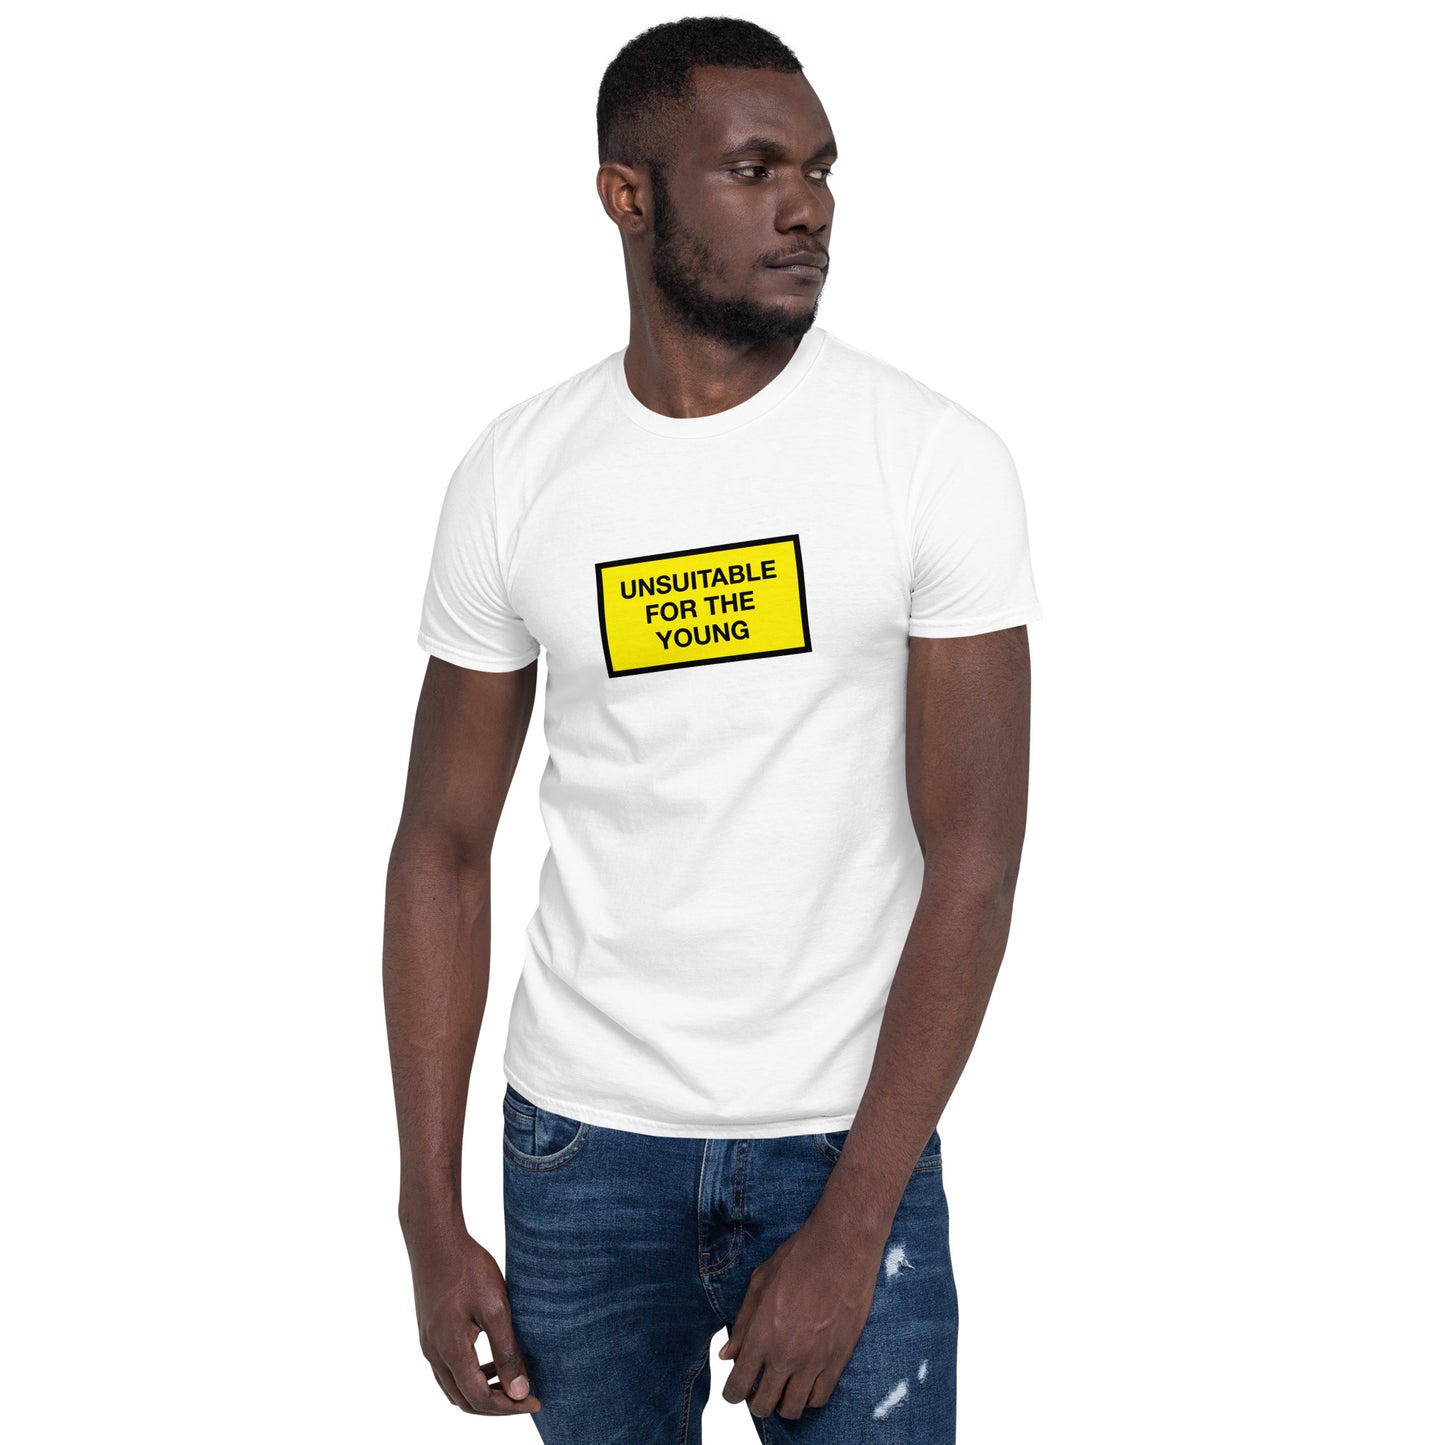 Unsuitable For The Young - White Tee